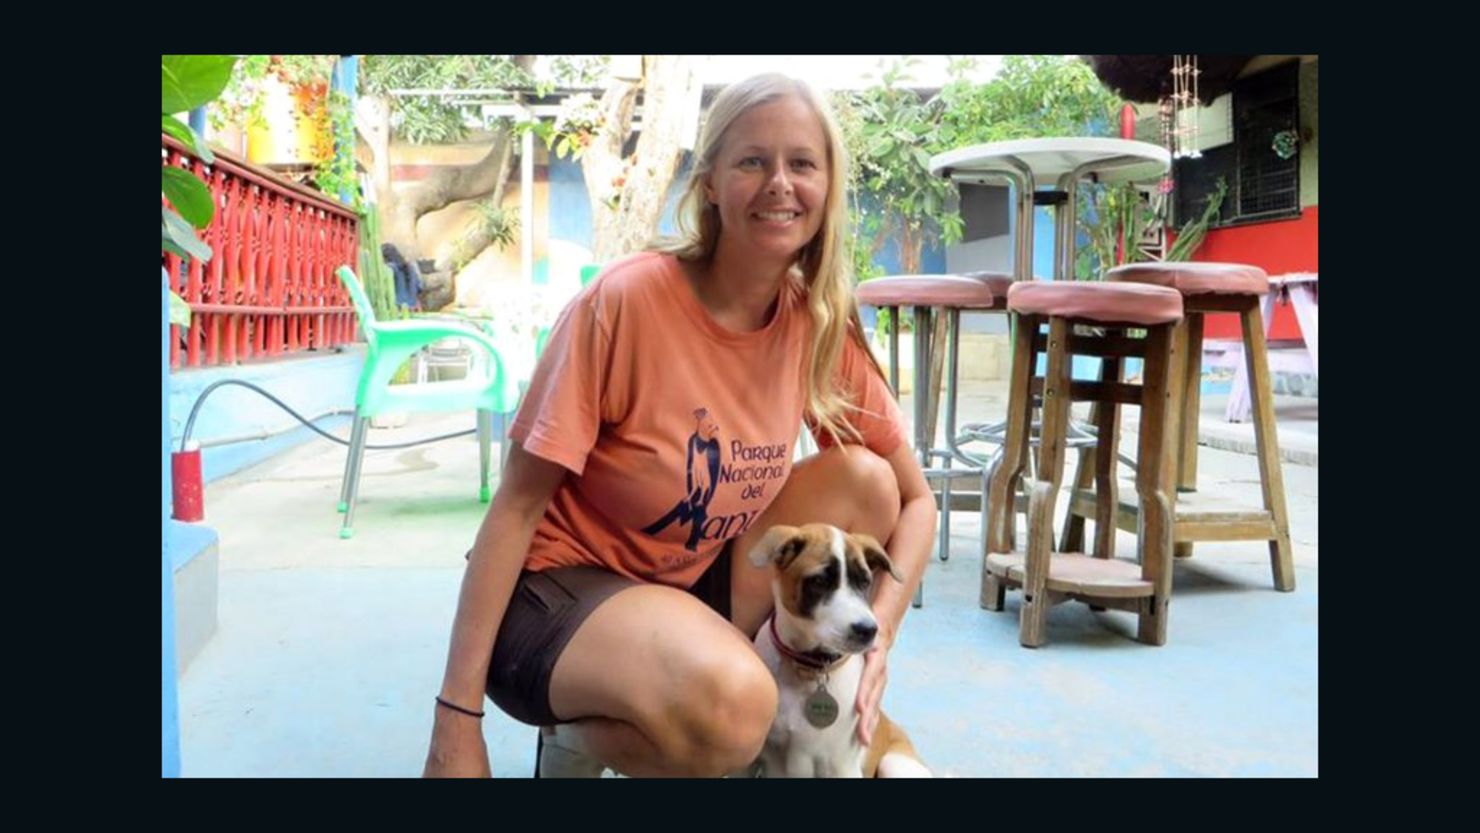 American veterinarian Stacey Addison, traveling alone in Timor-Leste, has been detained in the country since September 5.